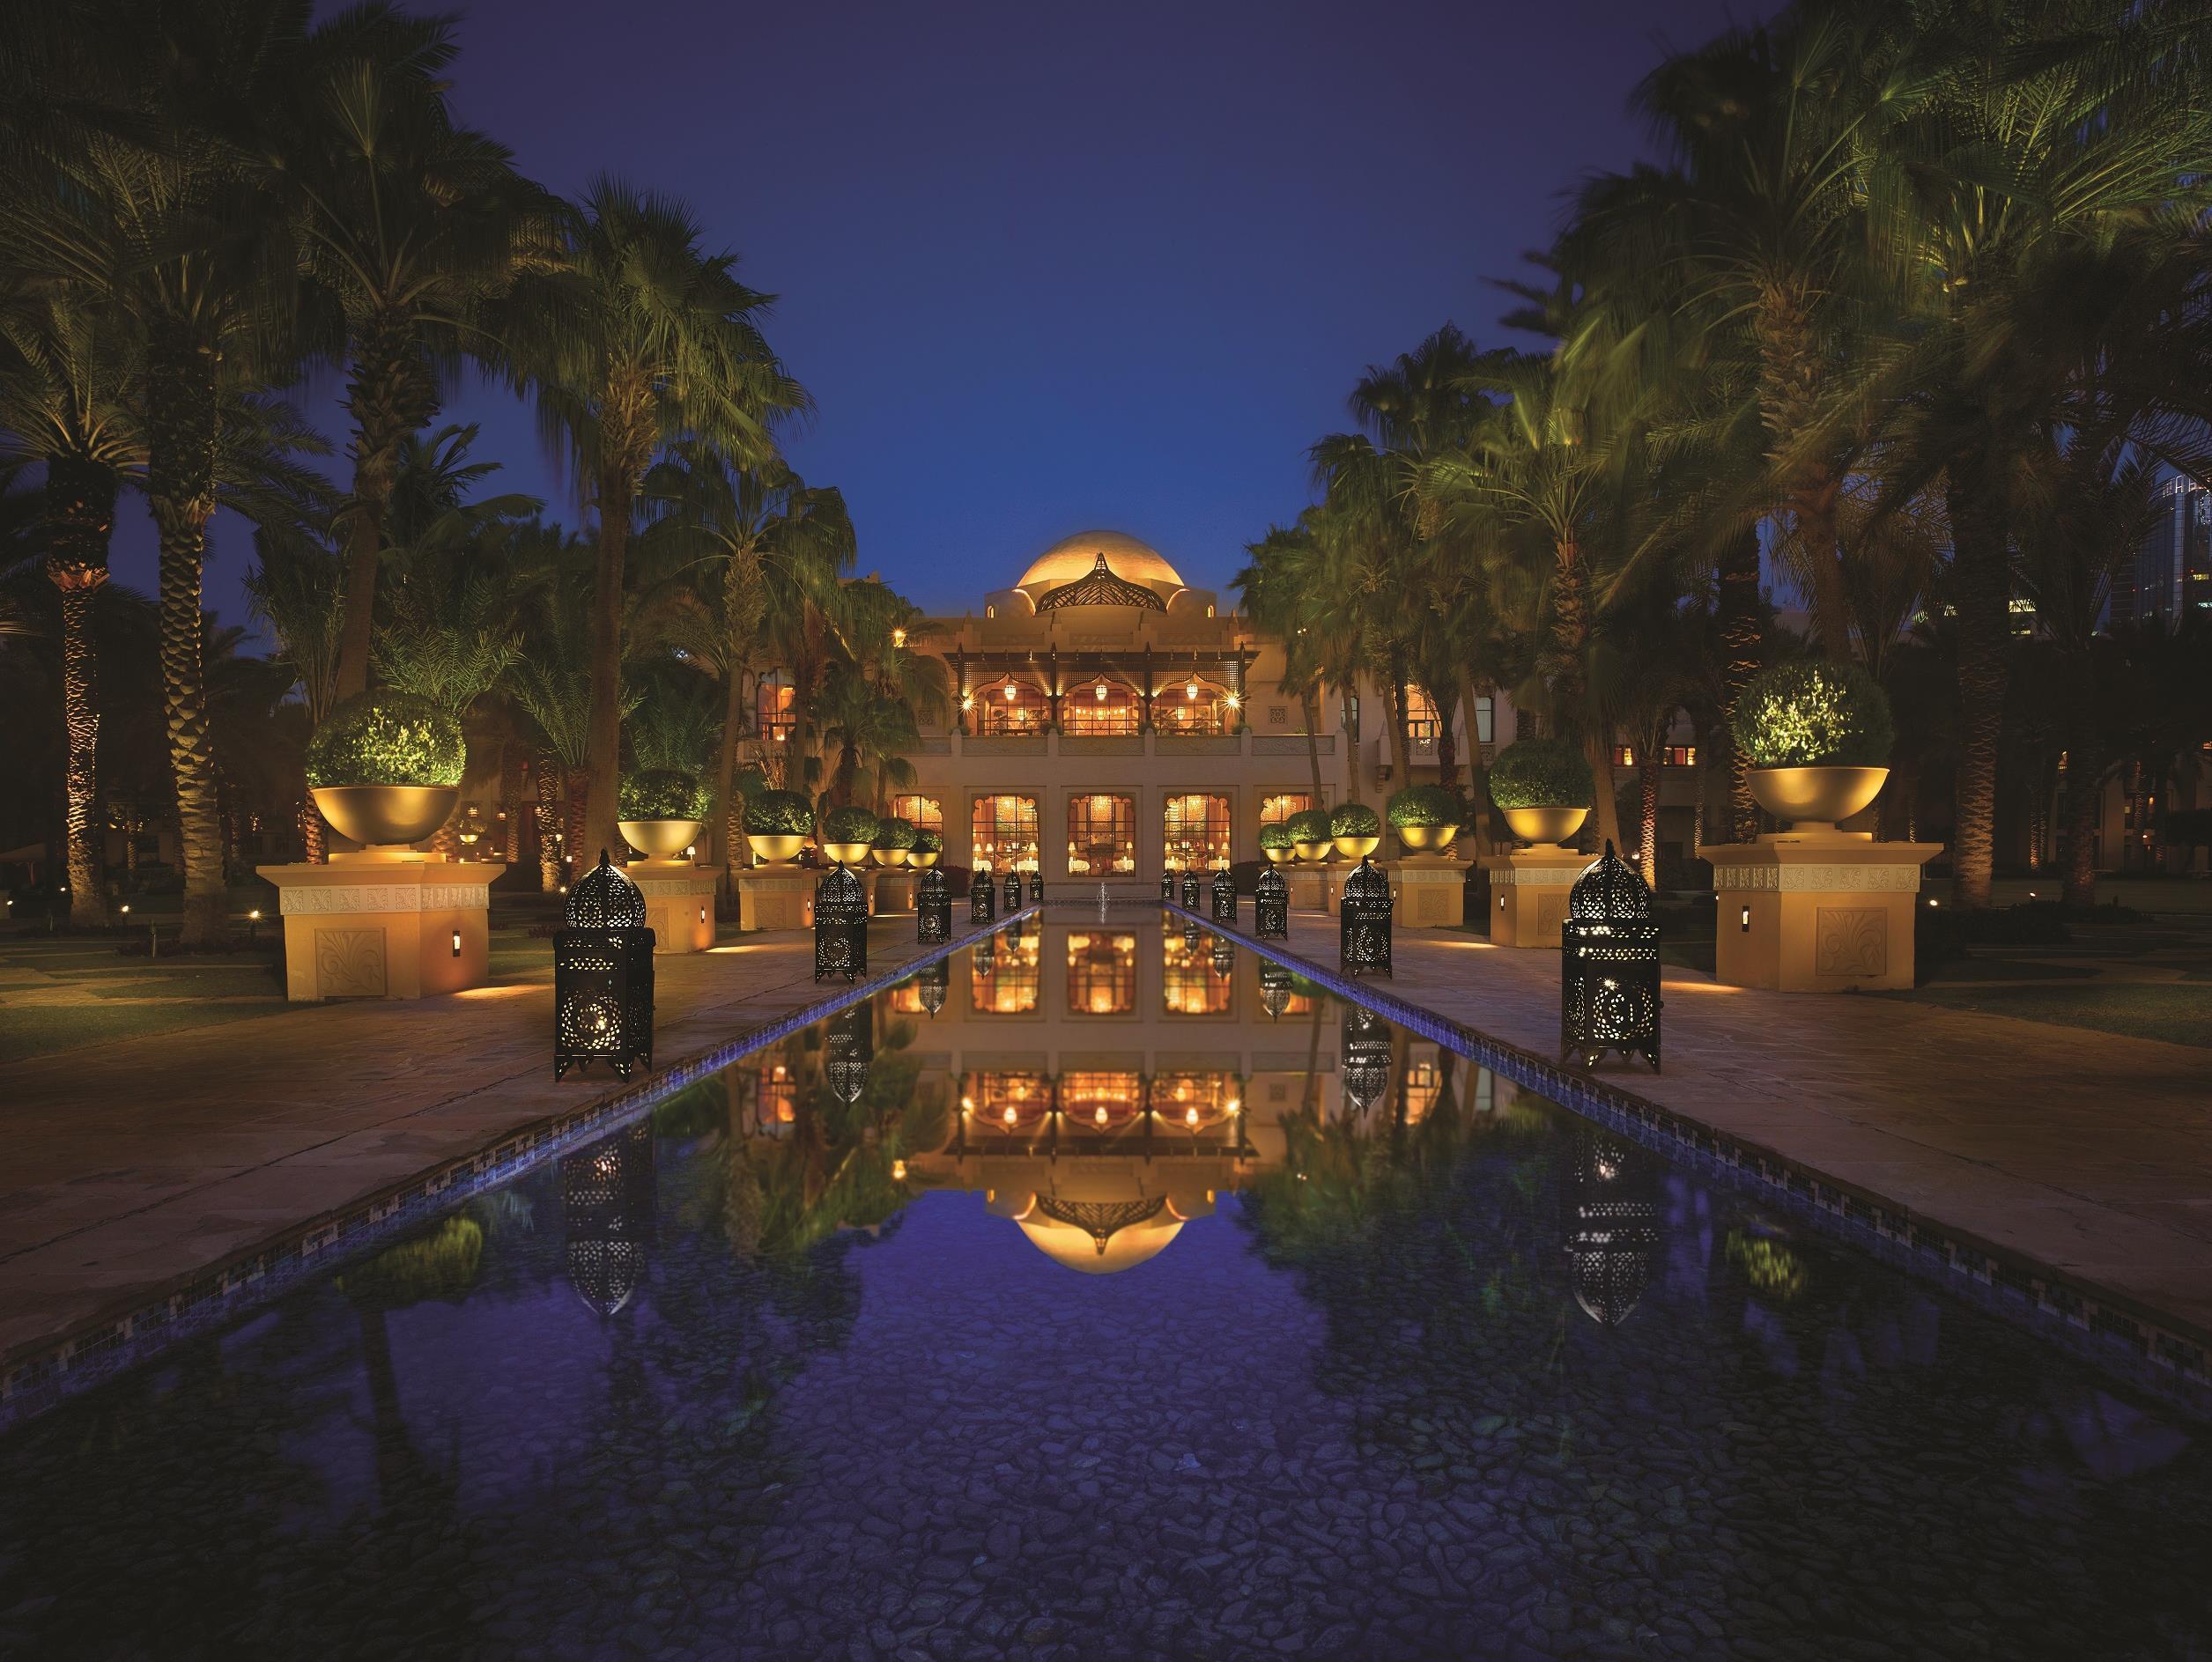 One&Only Royal Mirage Emirate of Dubai FAQ 2016, What facilities are there in One&Only Royal Mirage Emirate of Dubai 2016, What Languages Spoken are Supported in One&Only Royal Mirage Emirate of Dubai 2016, Which payment cards are accepted in One&Only Royal Mirage Emirate of Dubai , Emirate of Dubai One&Only Royal Mirage room facilities and services Q&A 2016, Emirate of Dubai One&Only Royal Mirage online booking services 2016, Emirate of Dubai One&Only Royal Mirage address 2016, Emirate of Dubai One&Only Royal Mirage telephone number 2016,Emirate of Dubai One&Only Royal Mirage map 2016, Emirate of Dubai One&Only Royal Mirage traffic guide 2016, how to go Emirate of Dubai One&Only Royal Mirage, Emirate of Dubai One&Only Royal Mirage booking online 2016, Emirate of Dubai One&Only Royal Mirage room types 2016.